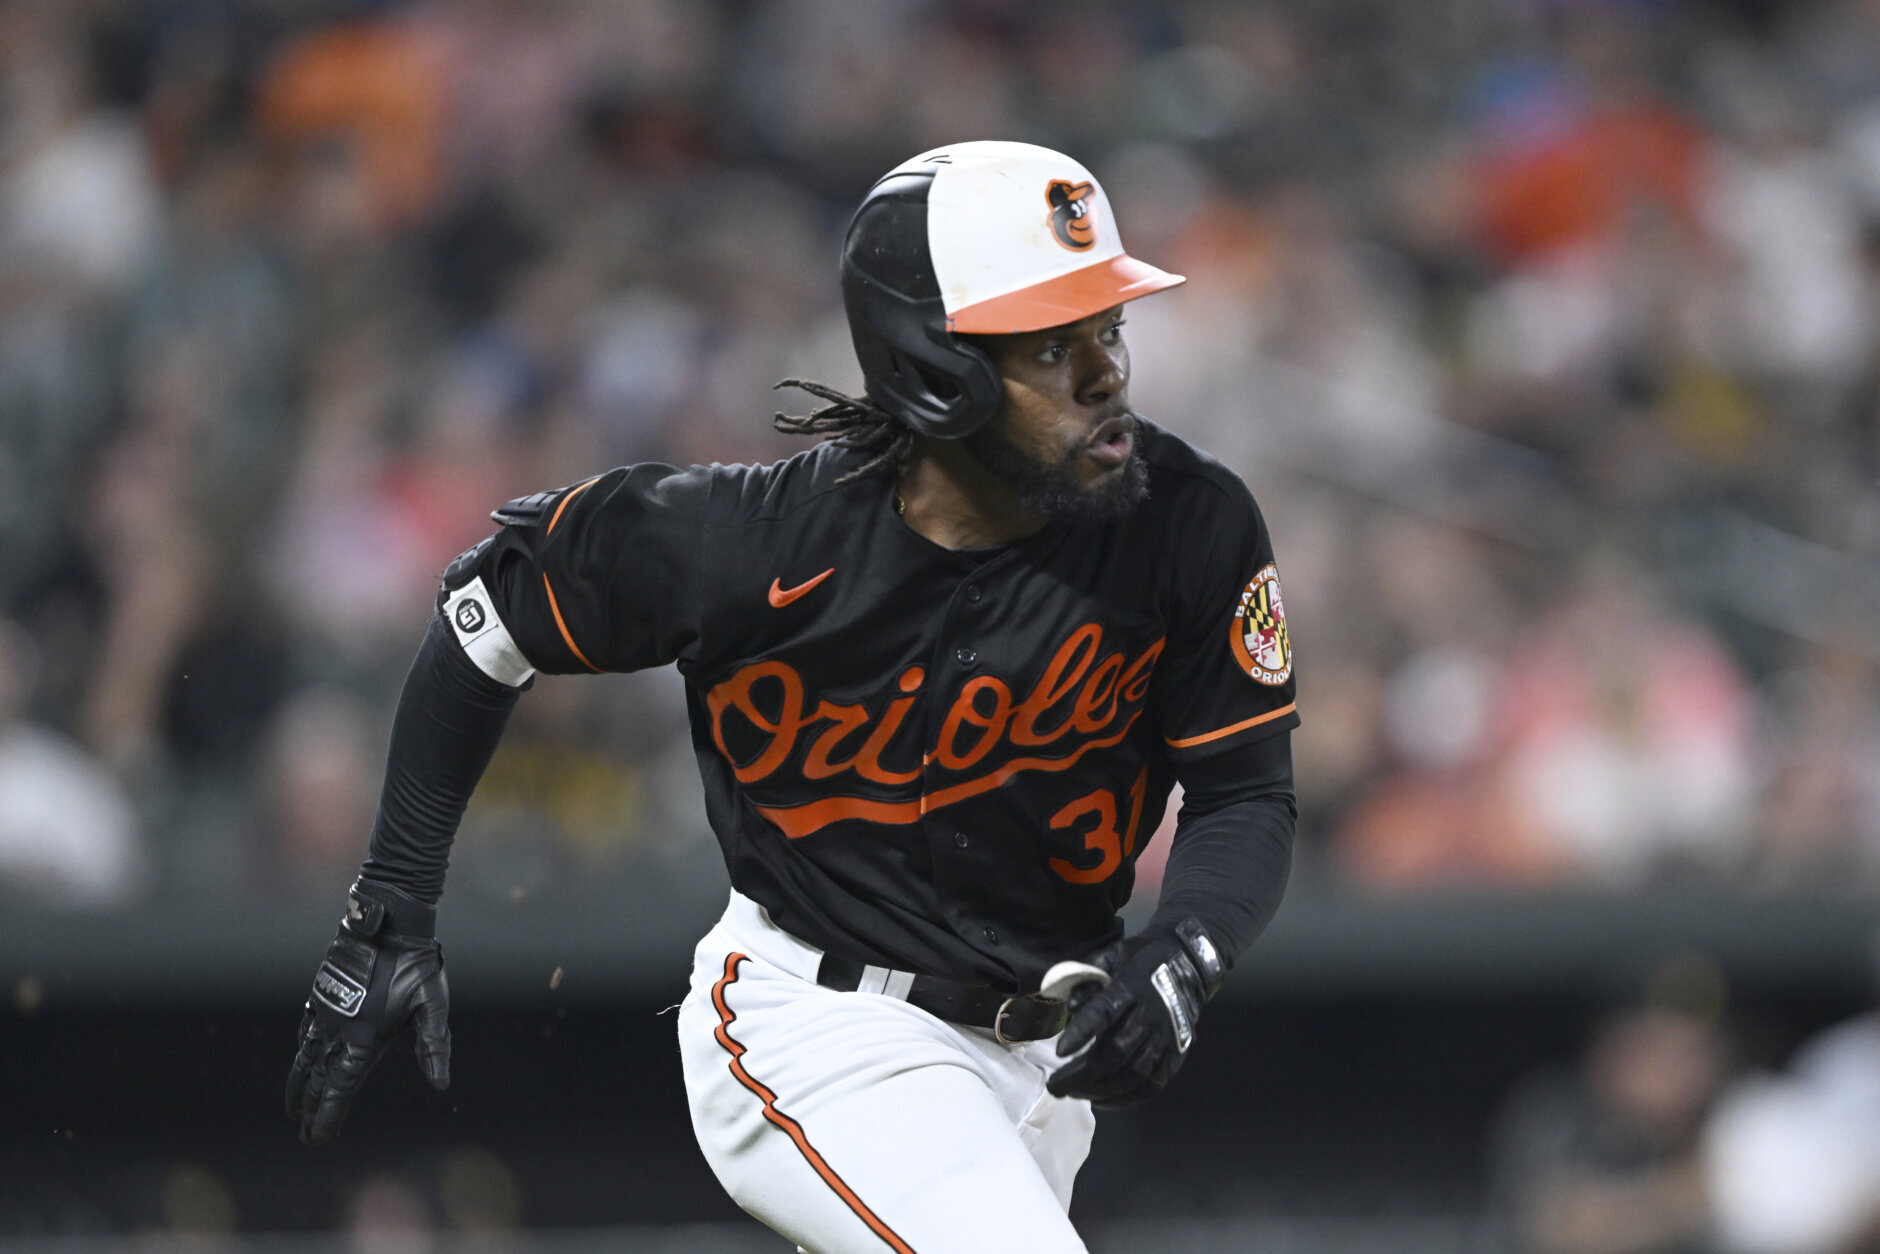 Cedric Mullins of the Baltimore Orioles looks on during batting